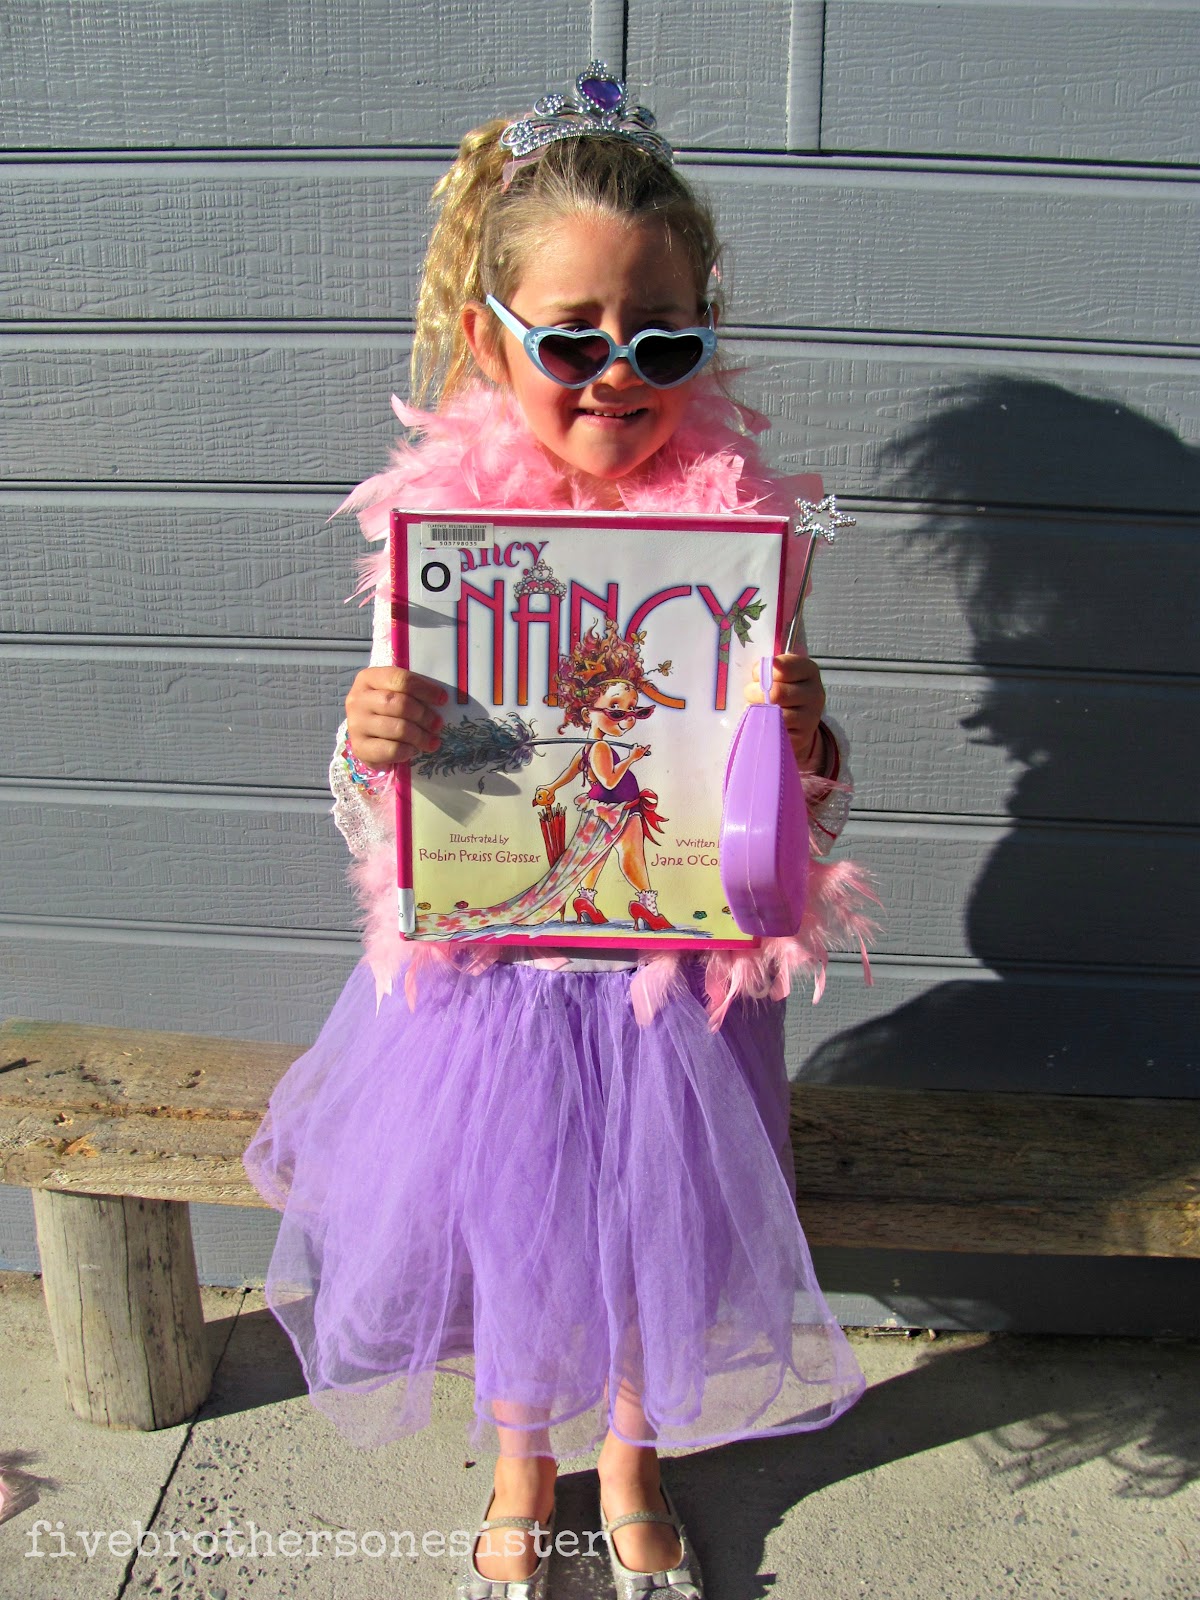 We have some inspiration to get you started in creating a costume for your kids this Book Week. 